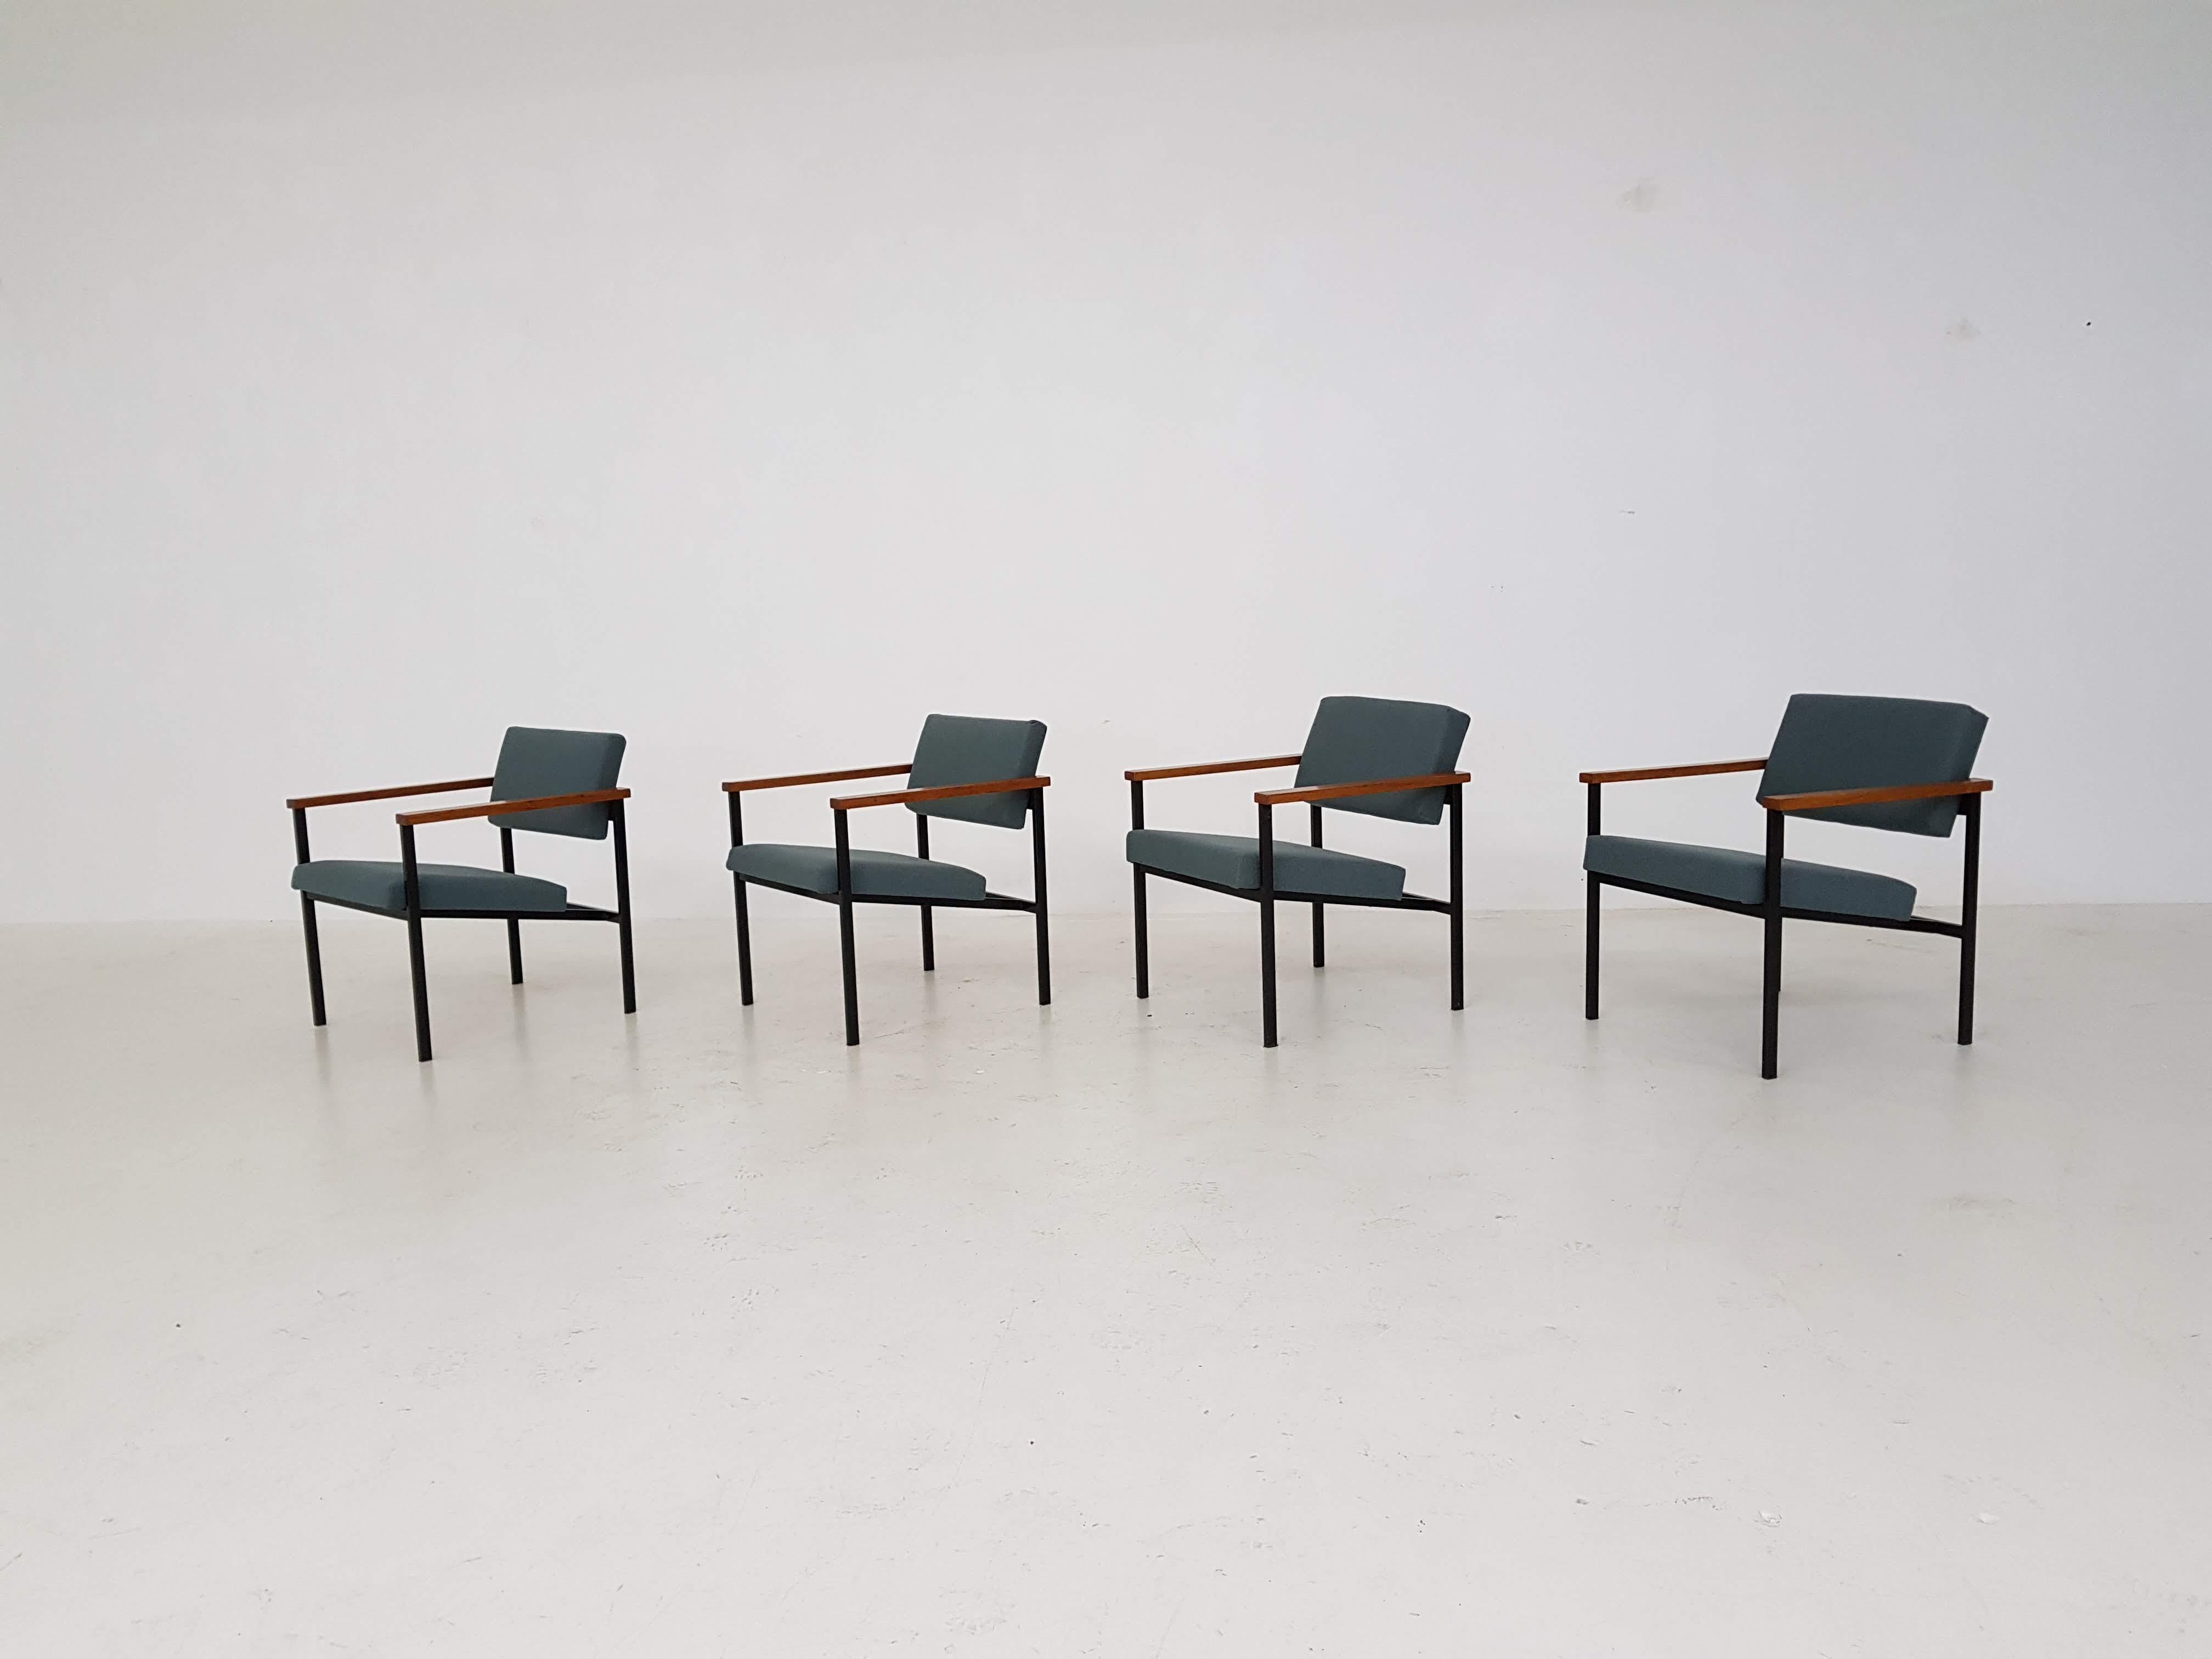 Black metal frame with wooden arm rests. They all have new filling and new green upholstery.

Measure: Width 58 cm; seating: 47 cm
Depth 60 cm; seating 43 cm
Height 66 cm; seating 40 cm.